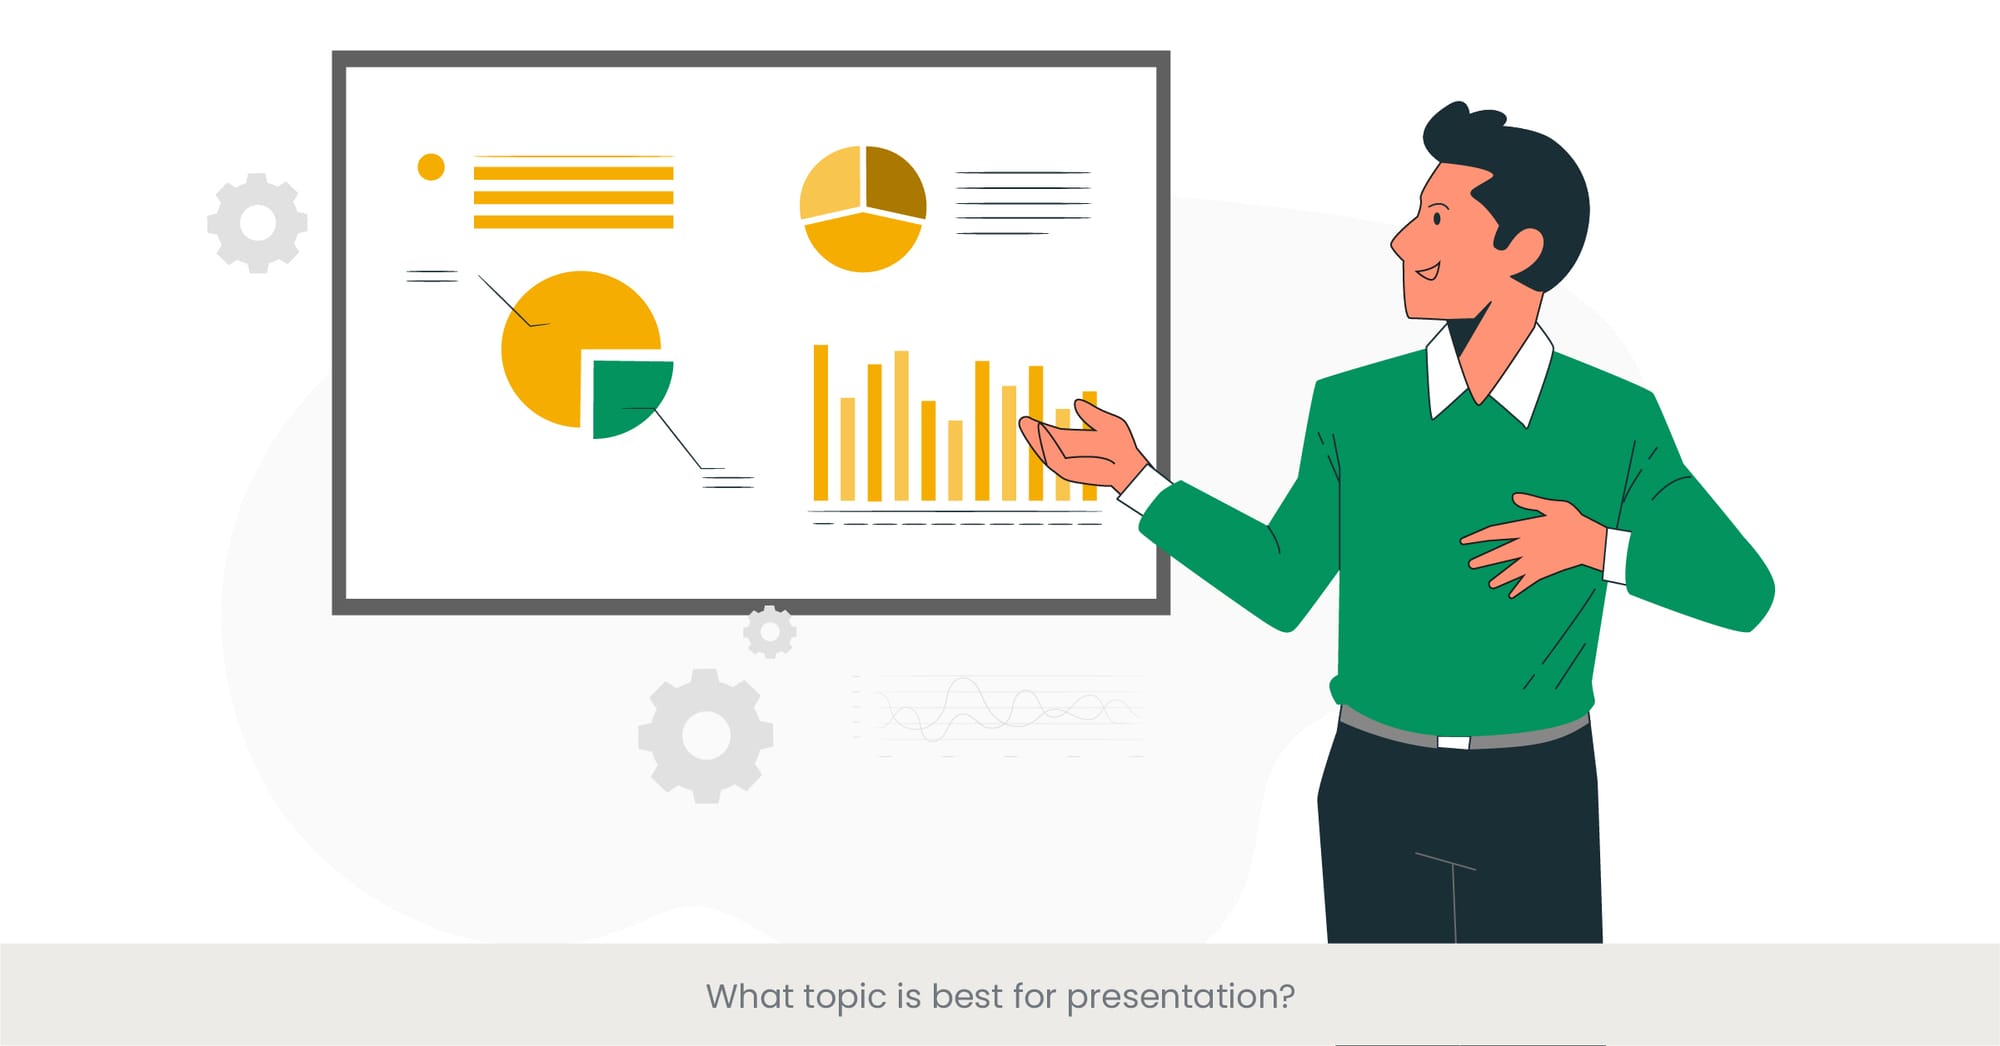  What topic is best for presentation